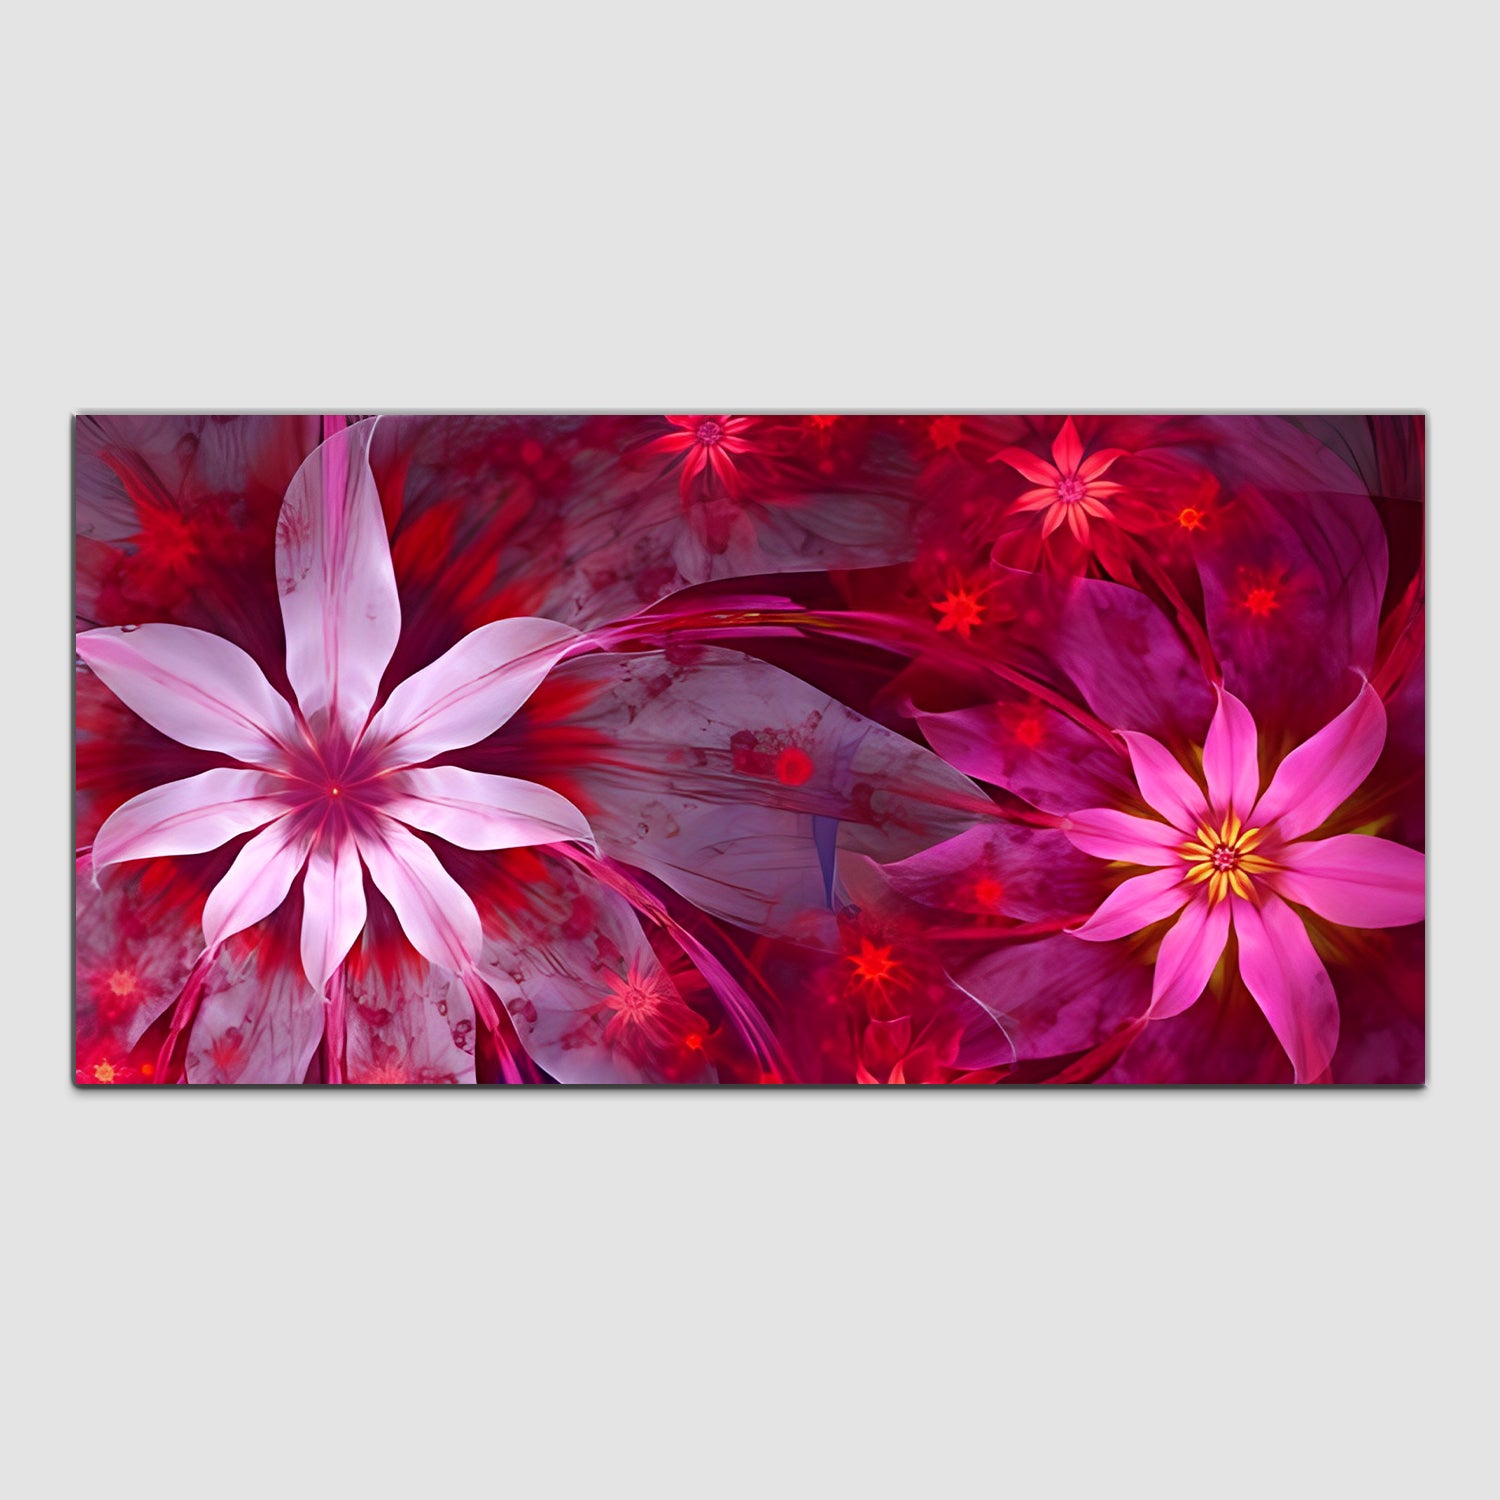 Flower Blue -Red Canvas Wall Painting